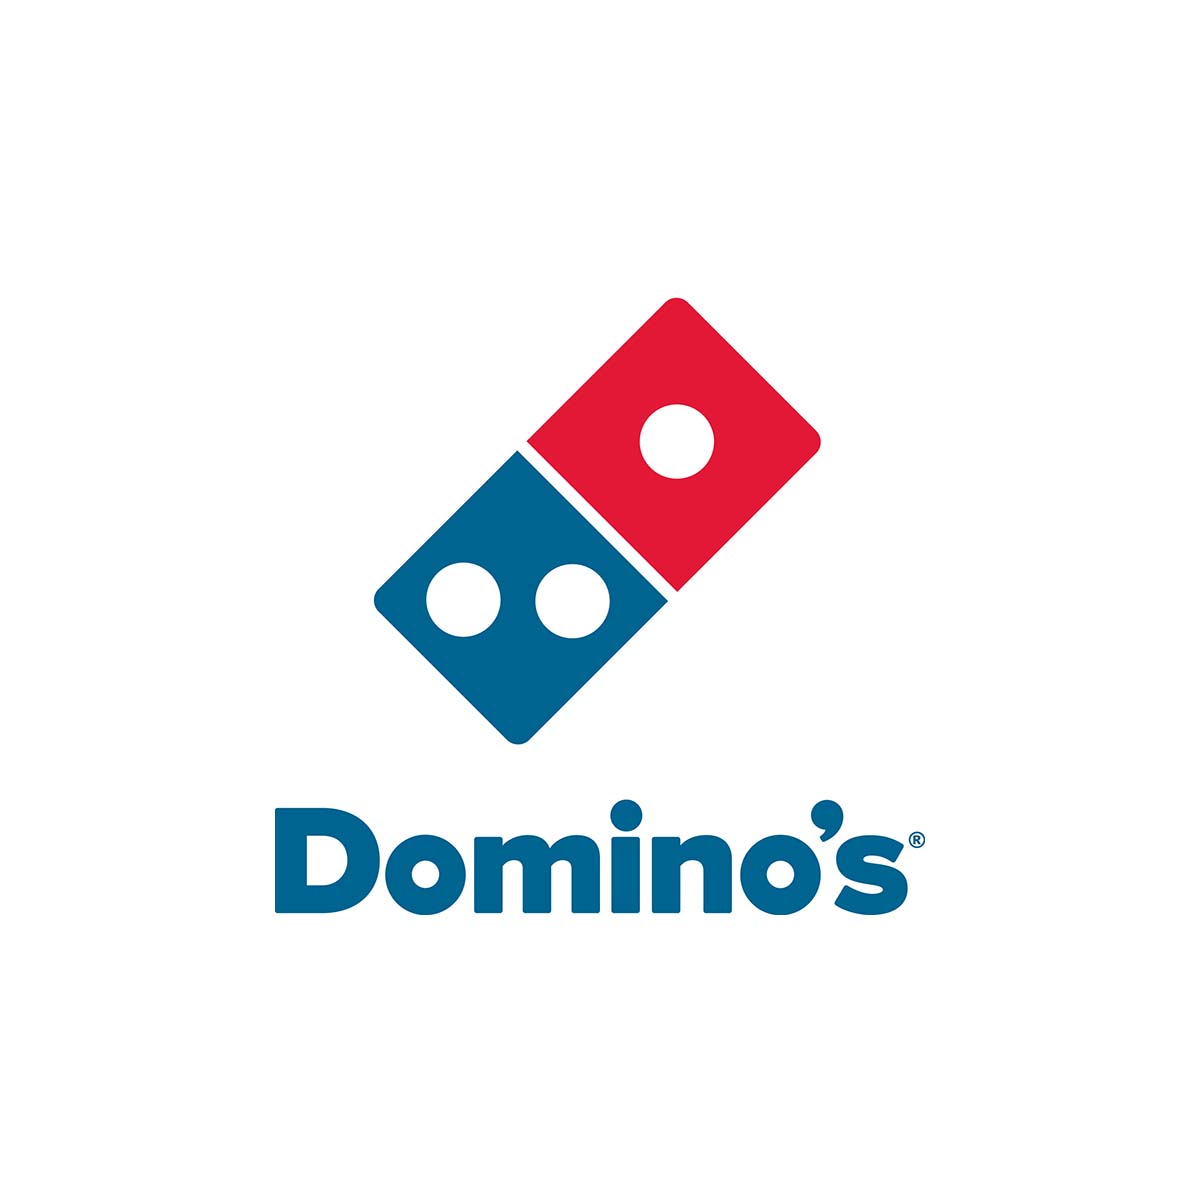 Find a Nearby Domino's